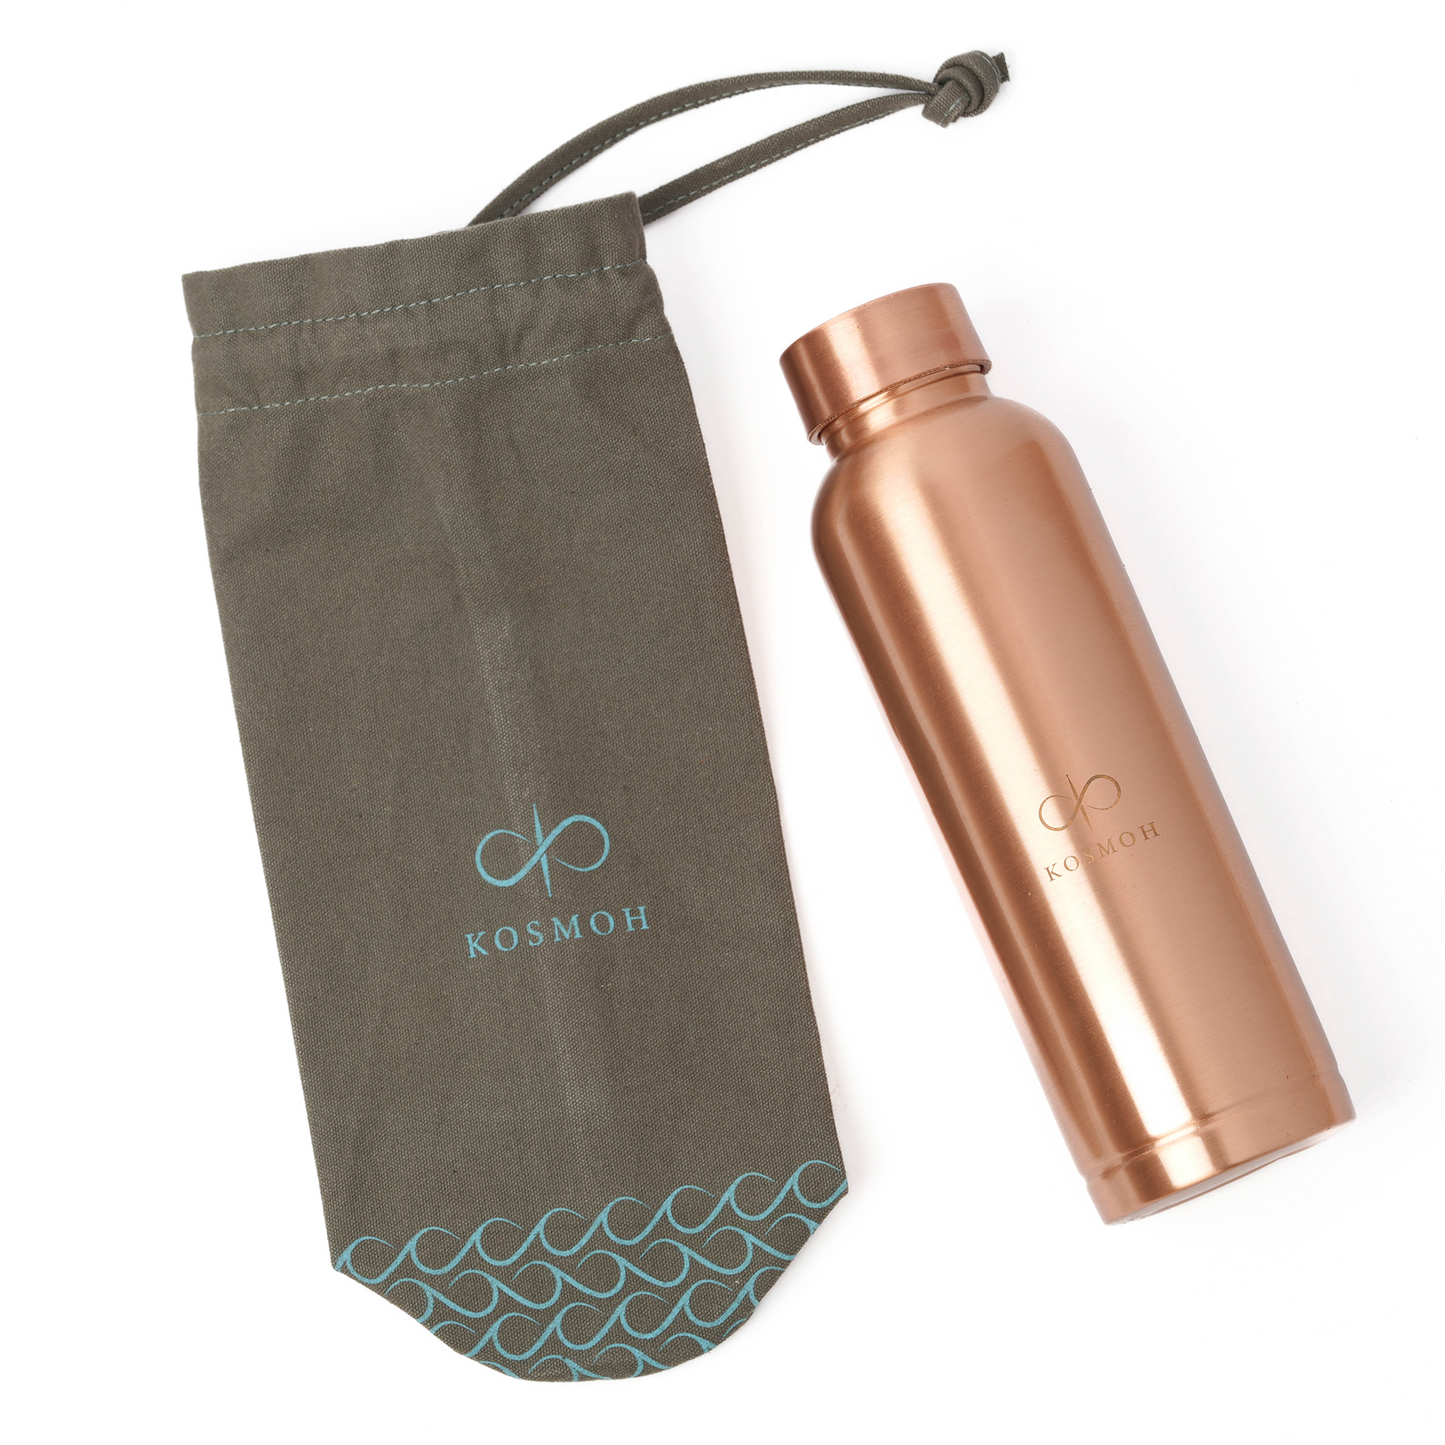 Copper Water Bottle (with eco-friendly cover)